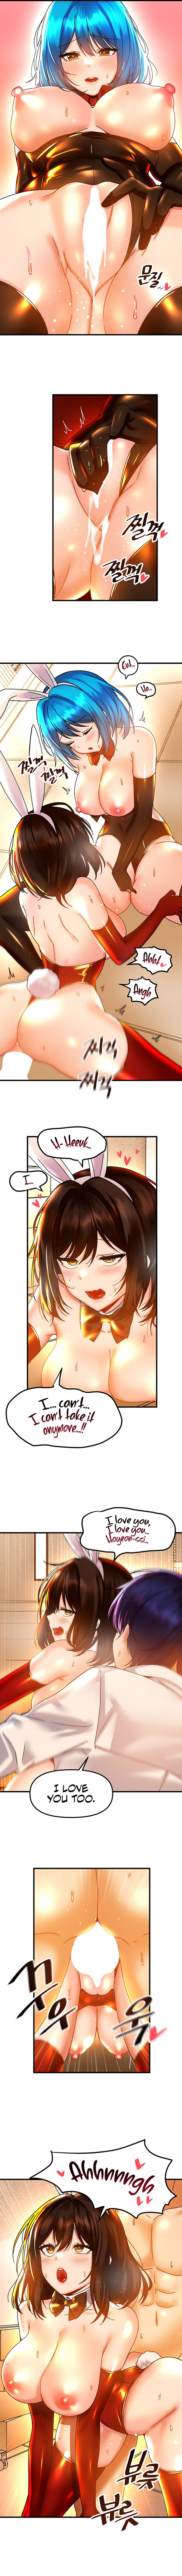 trapped-in-the-academys-eroge-chap-44-5